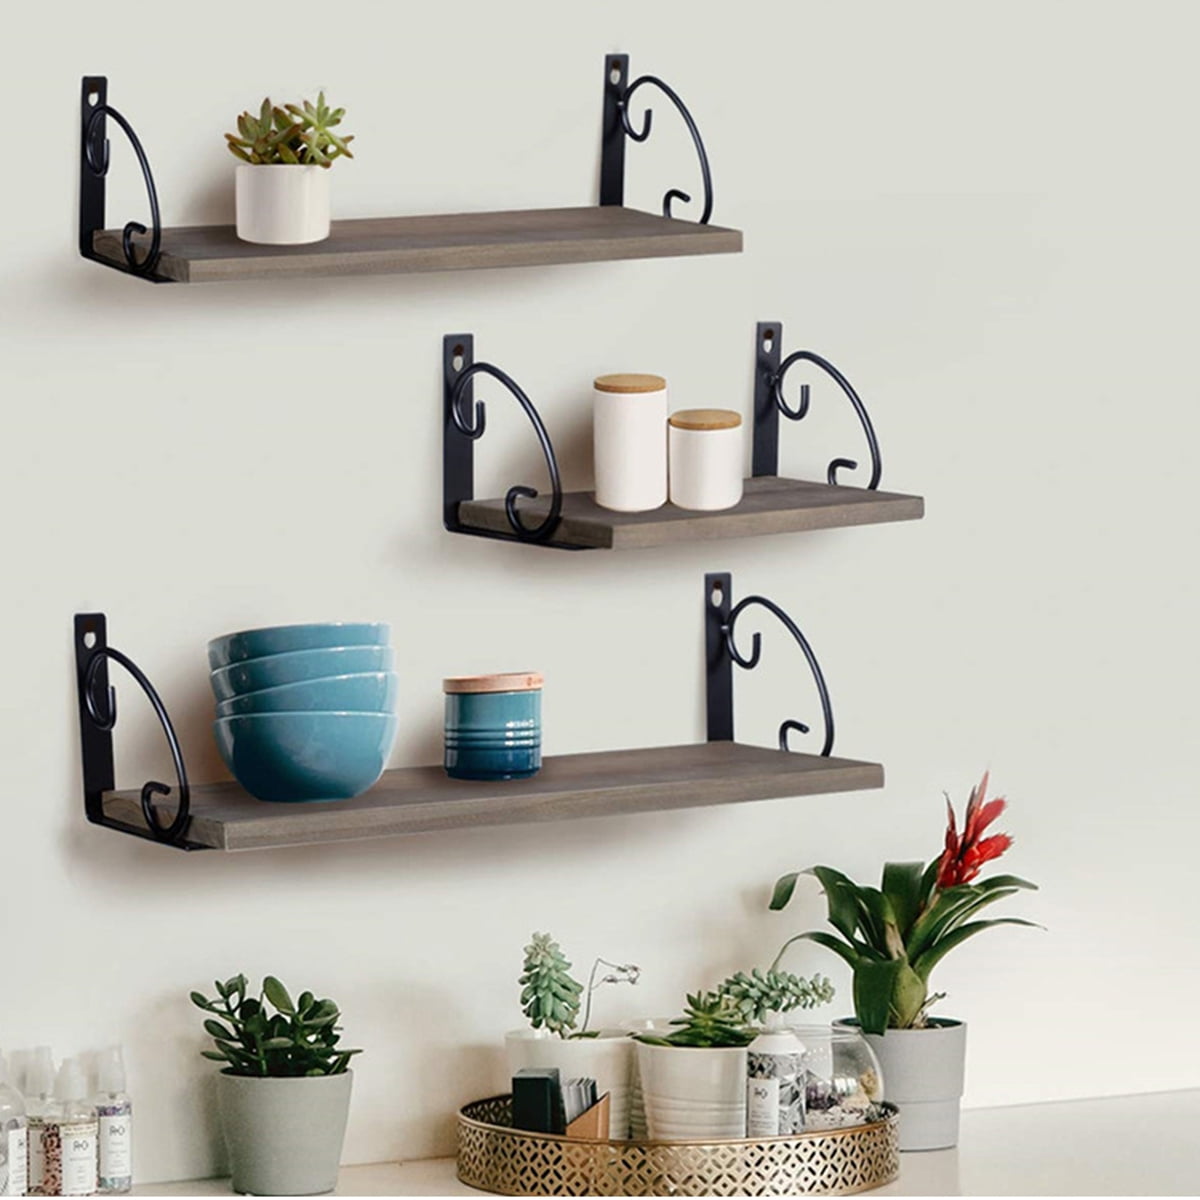 NEX Floating Shelves for Wall Mounted Rustic Wood Wall Shelves Set of 3 